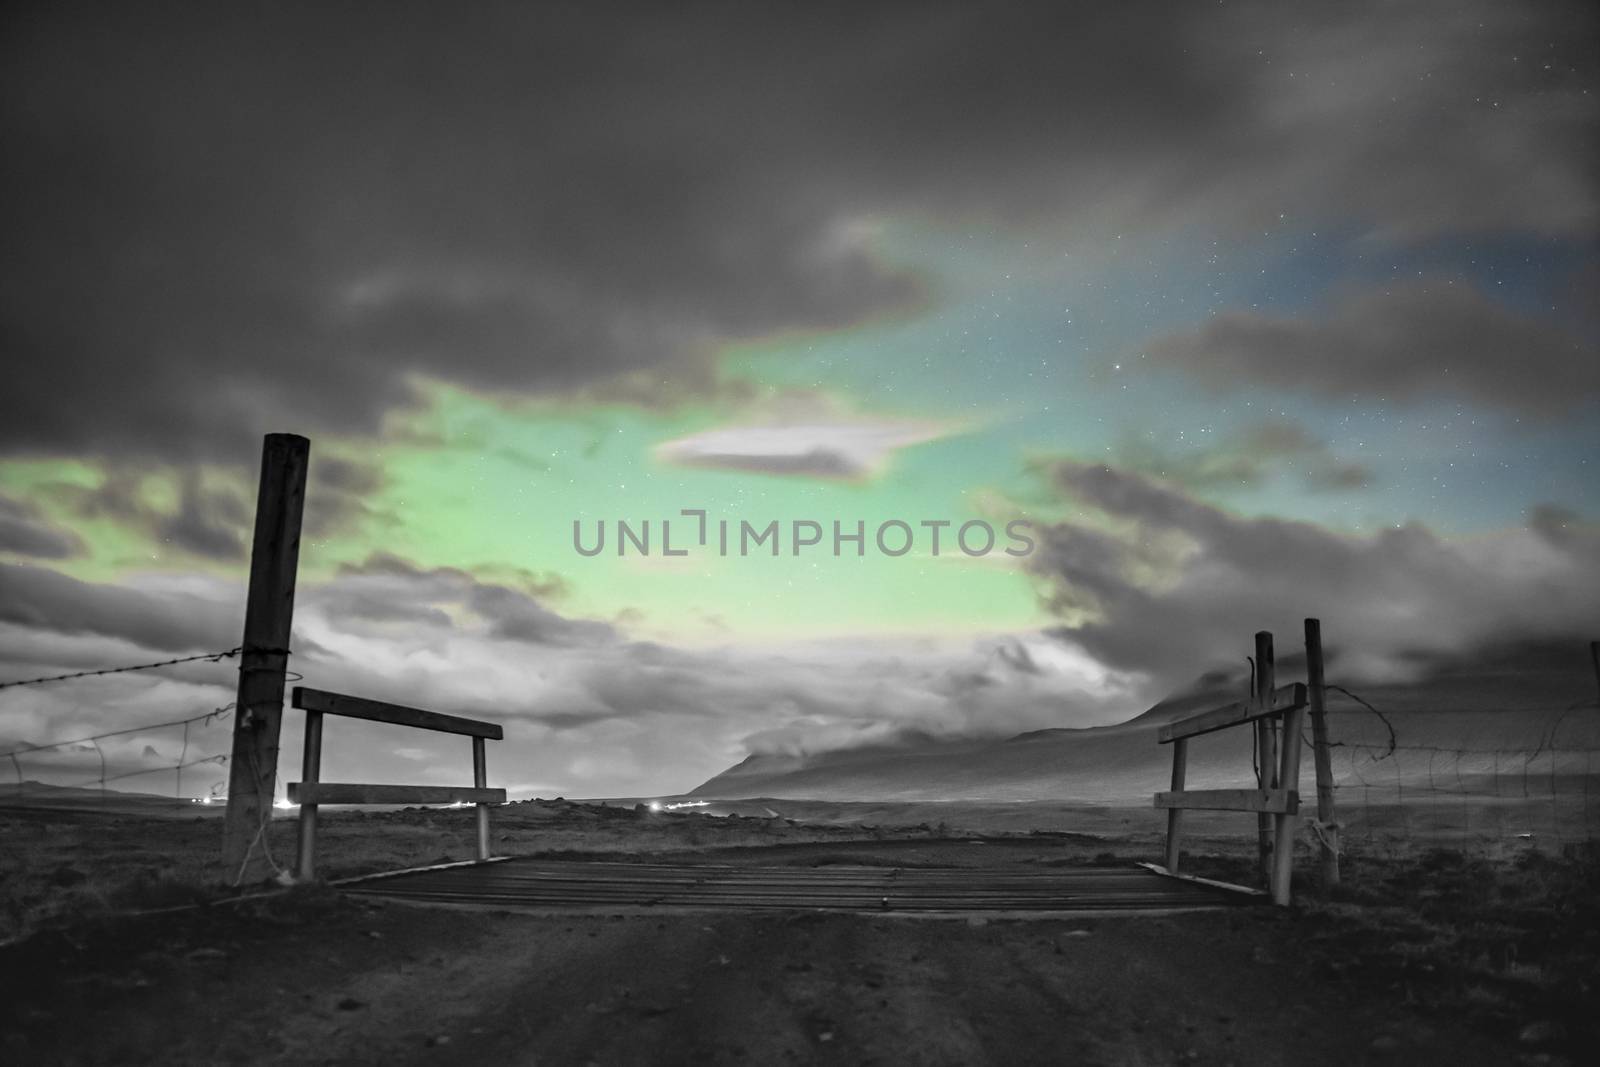 Aurora Borealis in Iceland northern lights shining through gaps in clouds over icelandic farm gate in black white and green by MXW_Stock